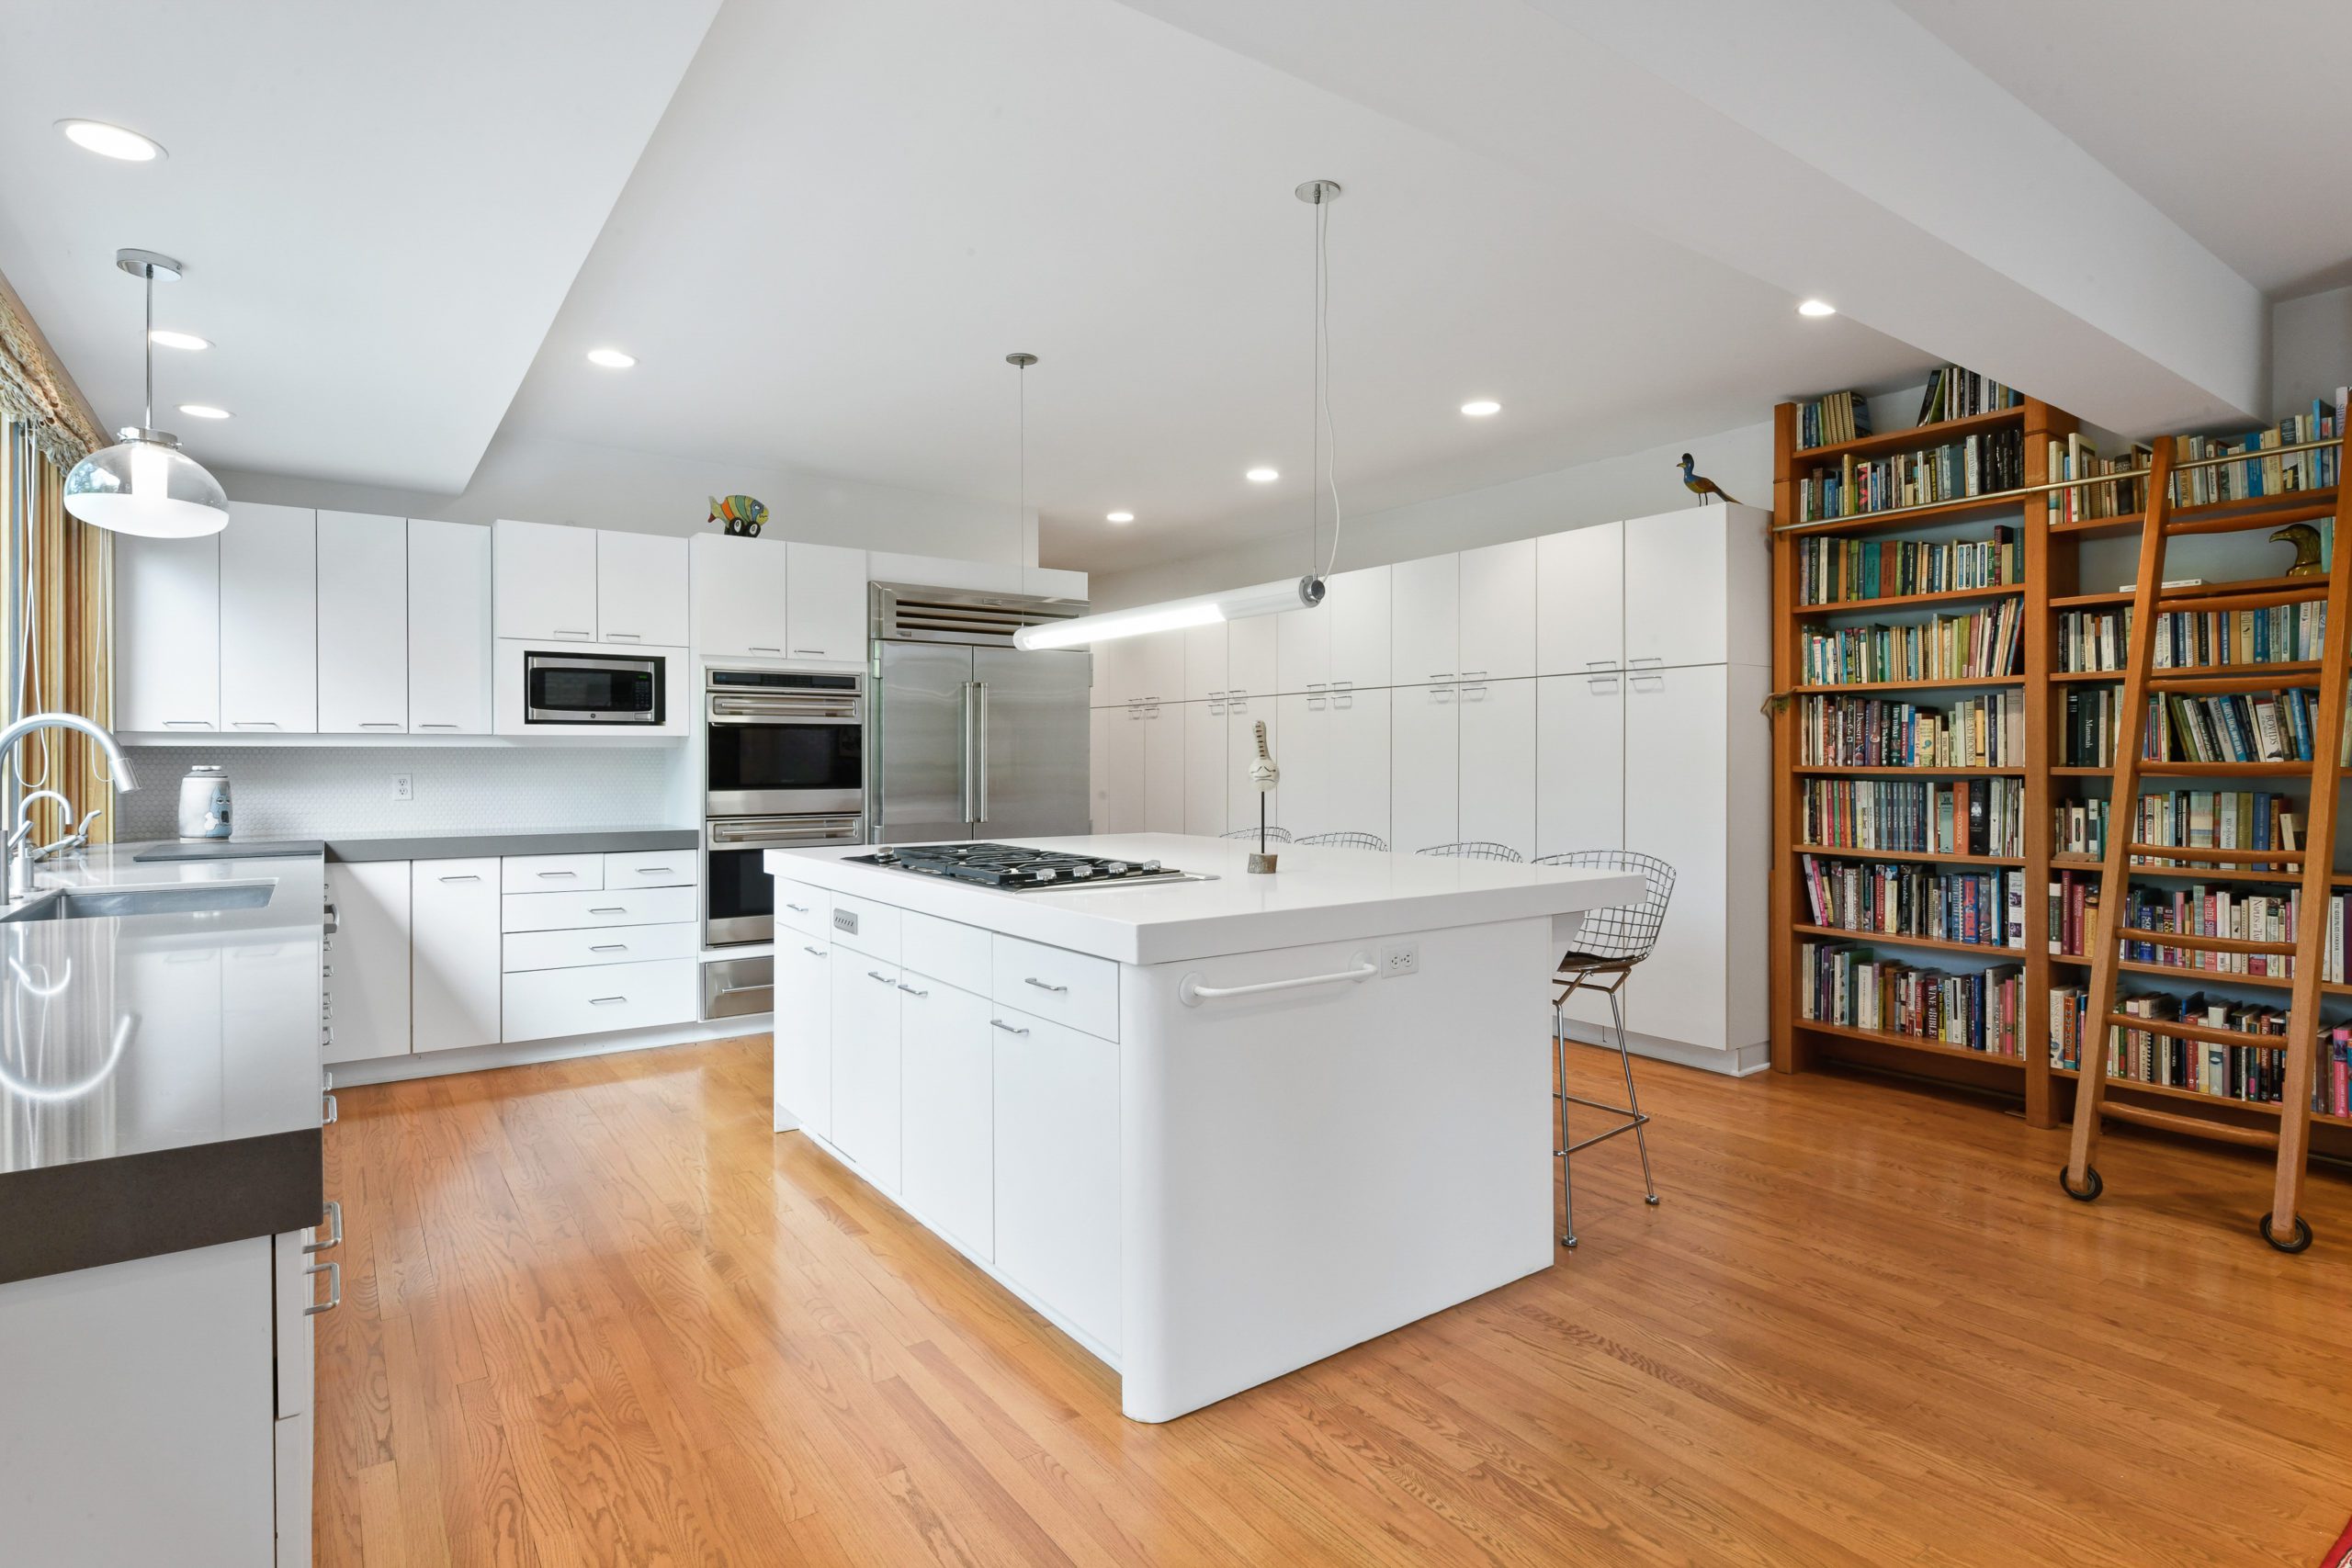 Interior kitchen with white cabinets and appliances and wood flooring